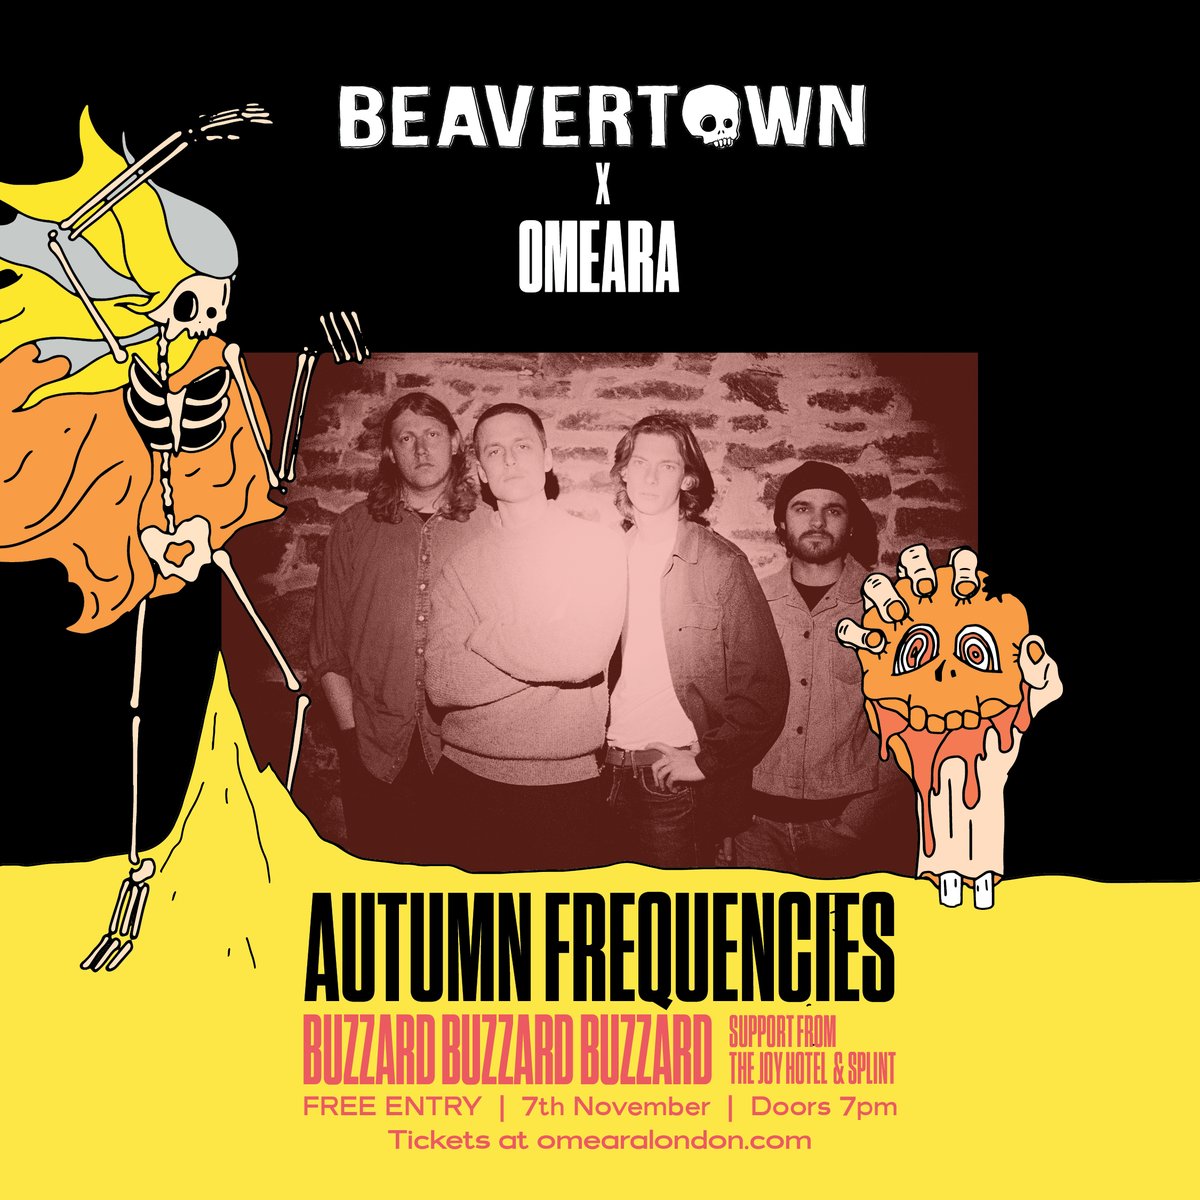 The magical mayhem of @beavertownbeer's Autumn Frequencies is back on 7th Nov 🍂 Our next edition sees a headline set from Cardiff's favourite noise-makers @buzzardbuzzard! Supporting them we have @thejoyhotel and @thisissplint. FREE ENTRY. omearalondon.com/event/beaverto…